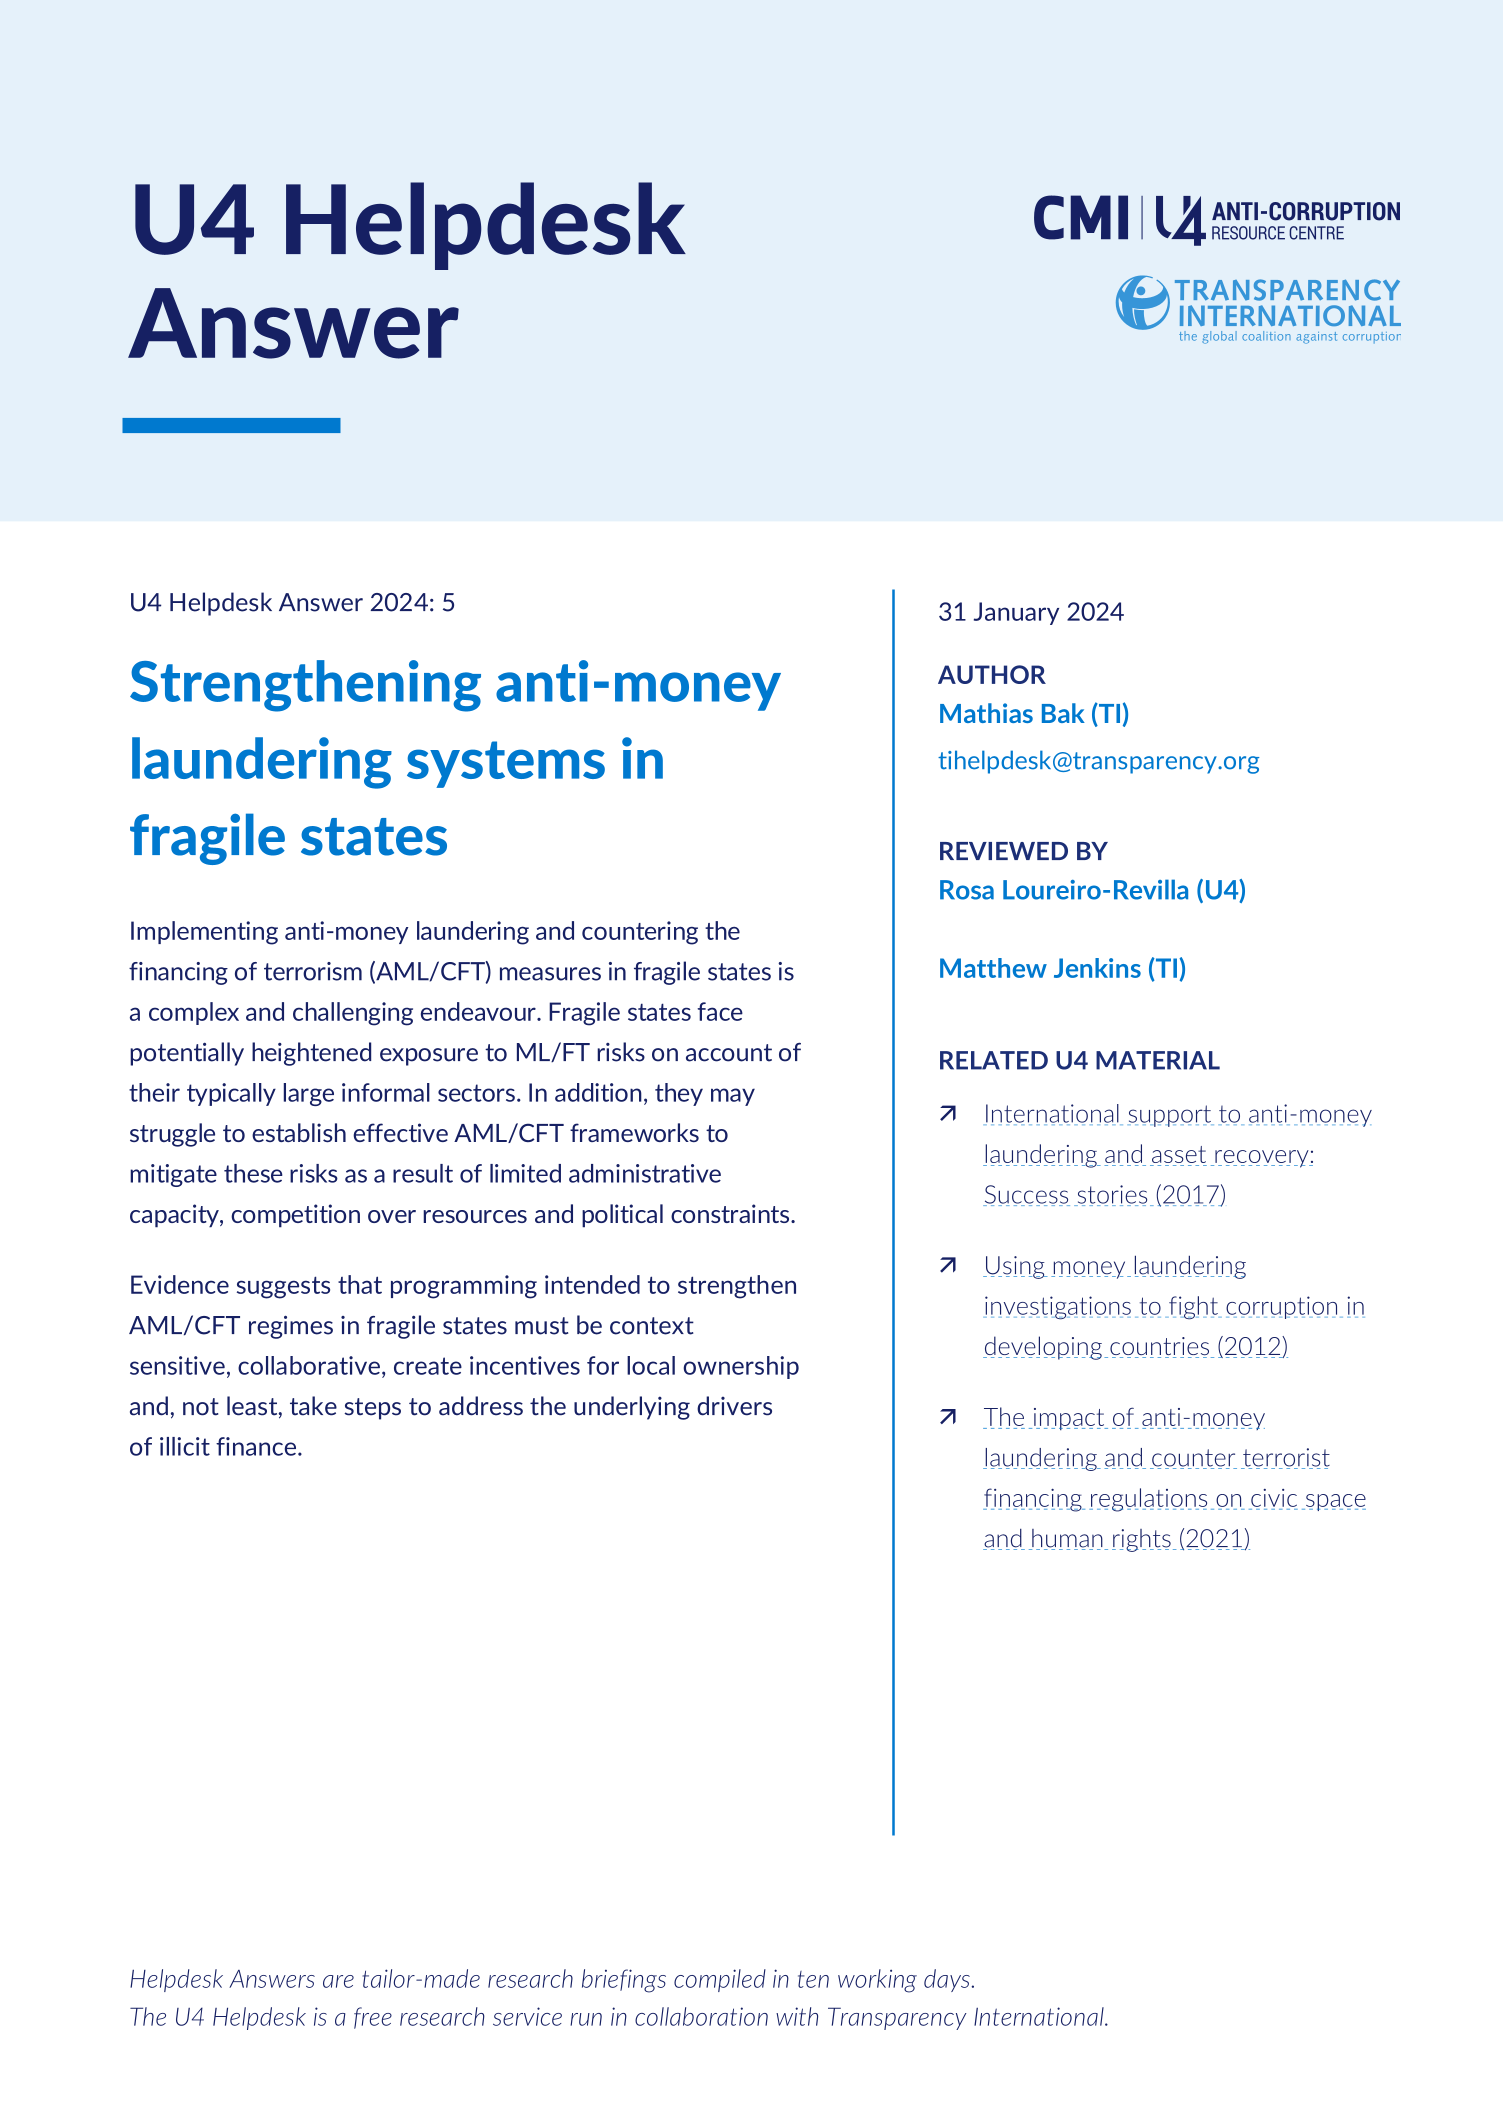 Strengthening anti-money laundering systems in fragile states